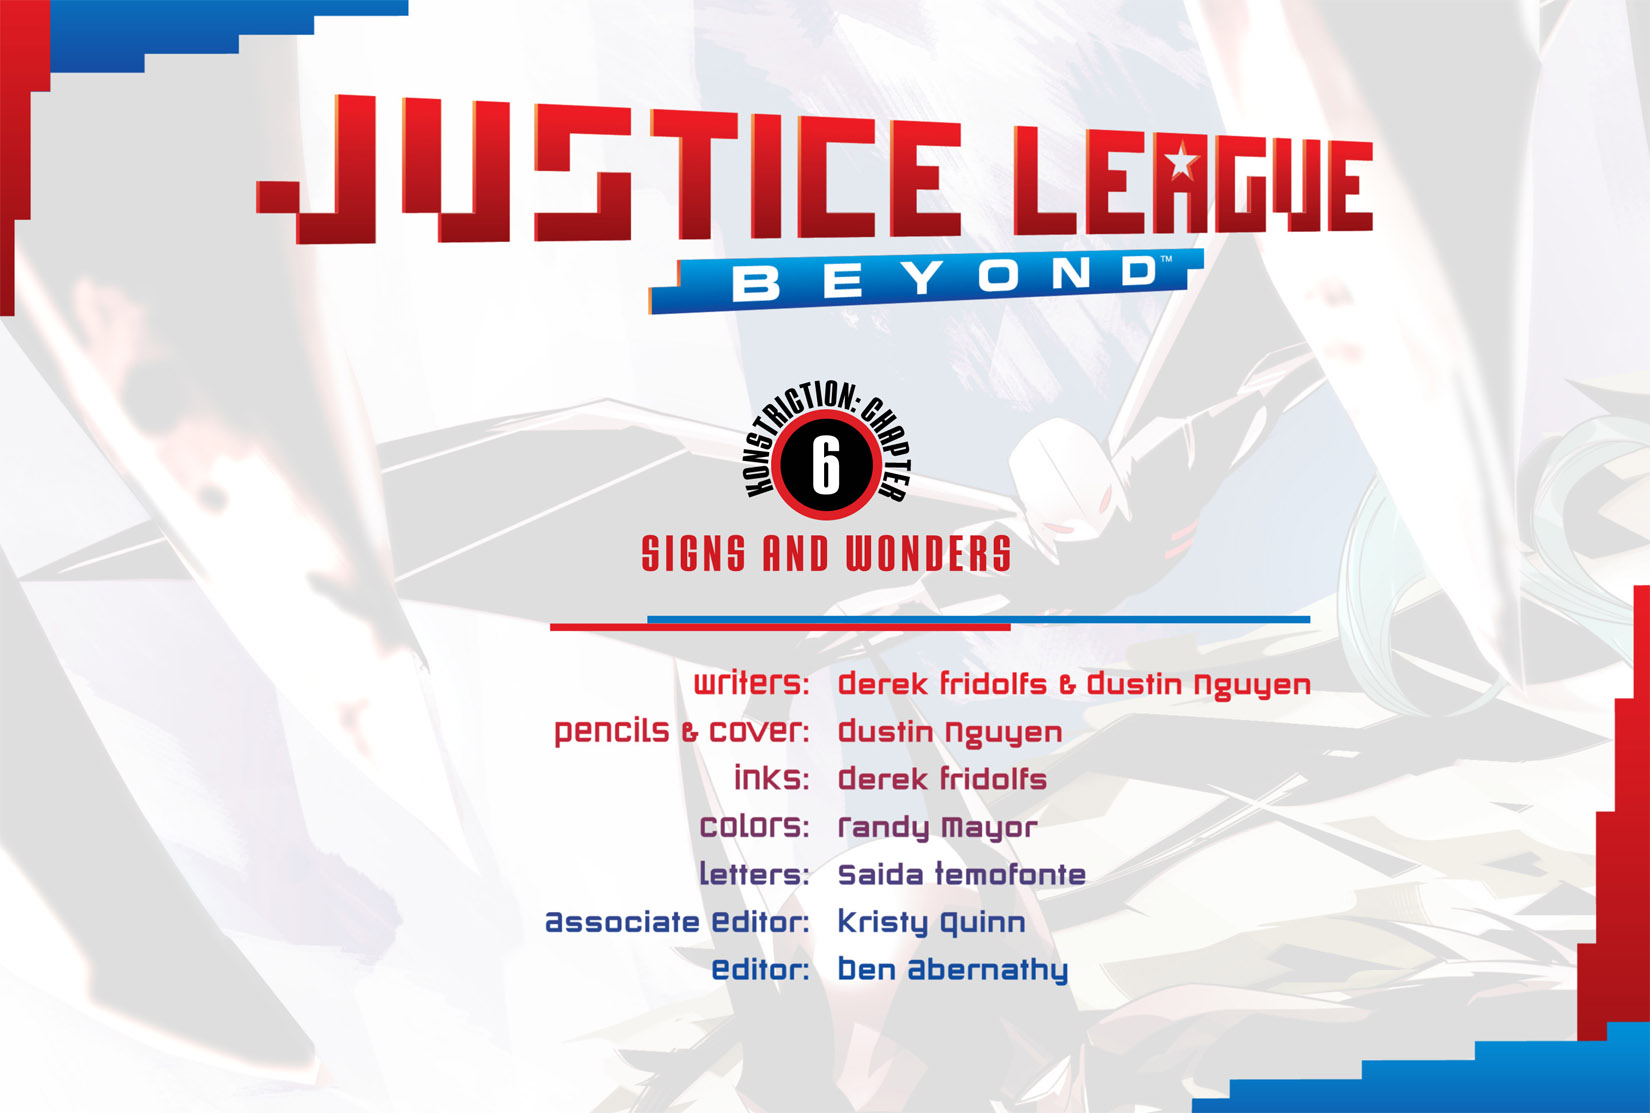 Read online Justice League Beyond comic -  Issue #6 - 2